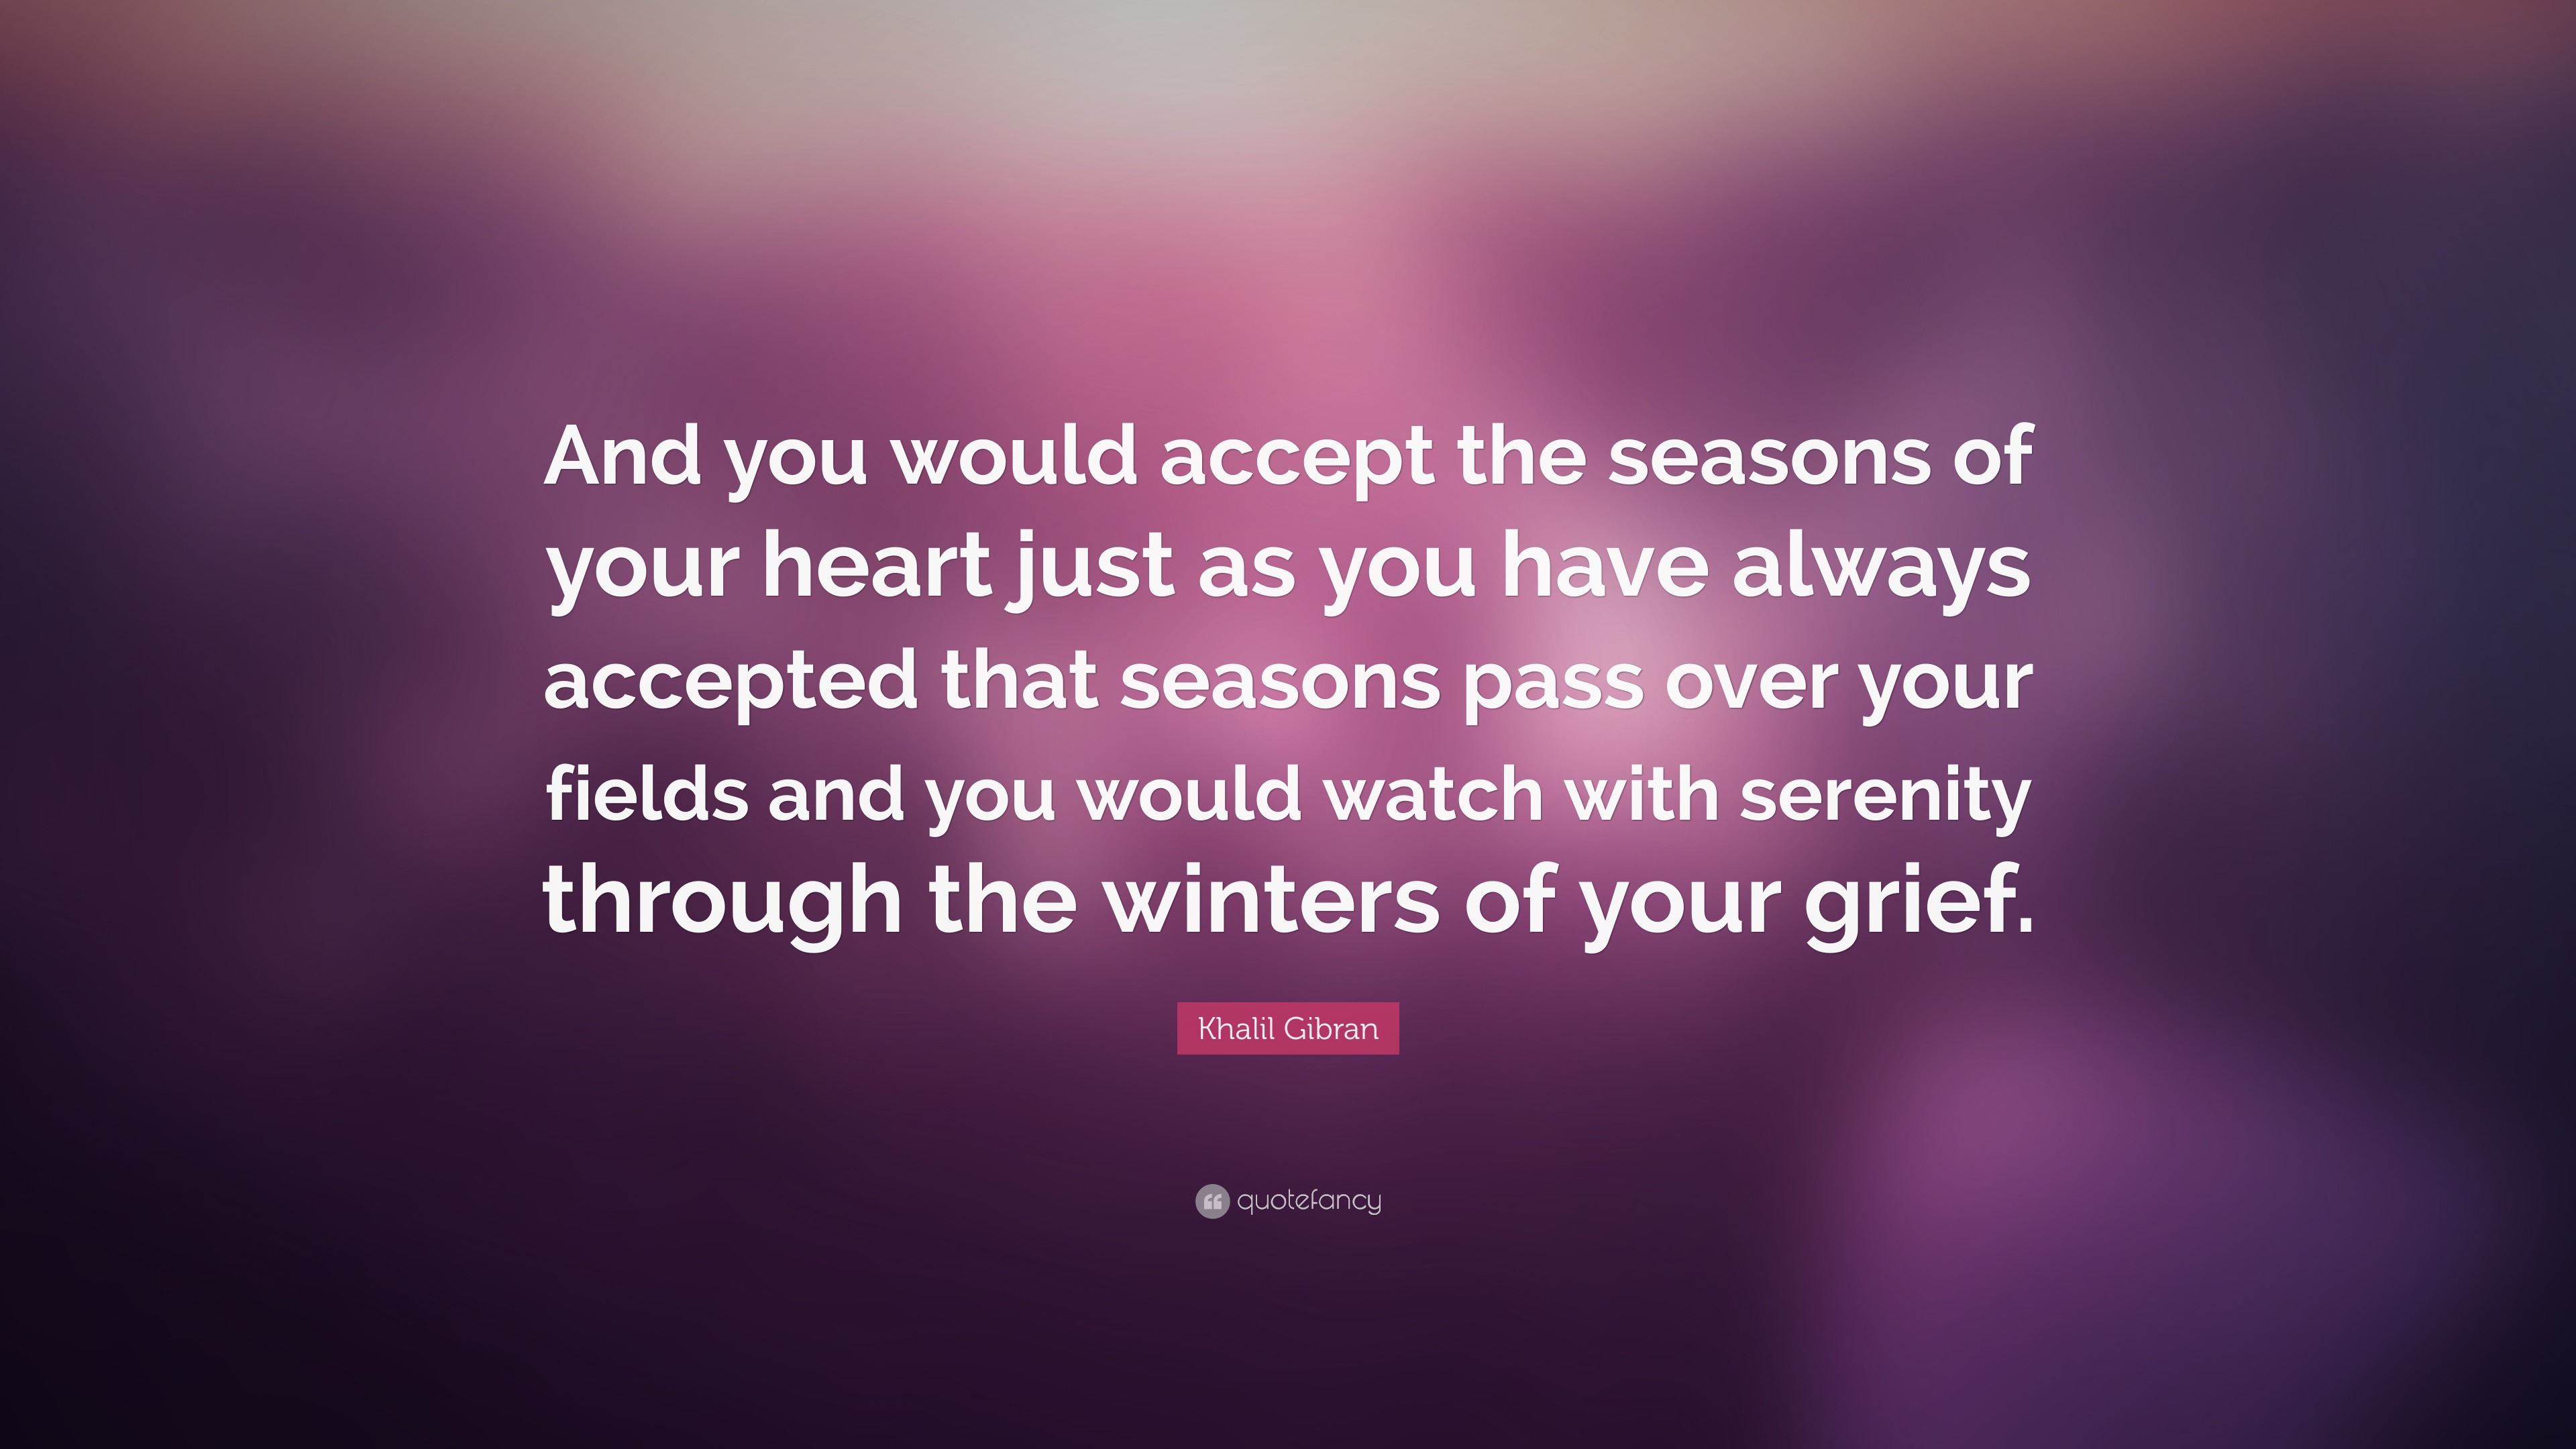 Khalil Gibran Quote: “And you would accept the seasons of your heart just  as you have always accepted that seasons pass over your fields and y”